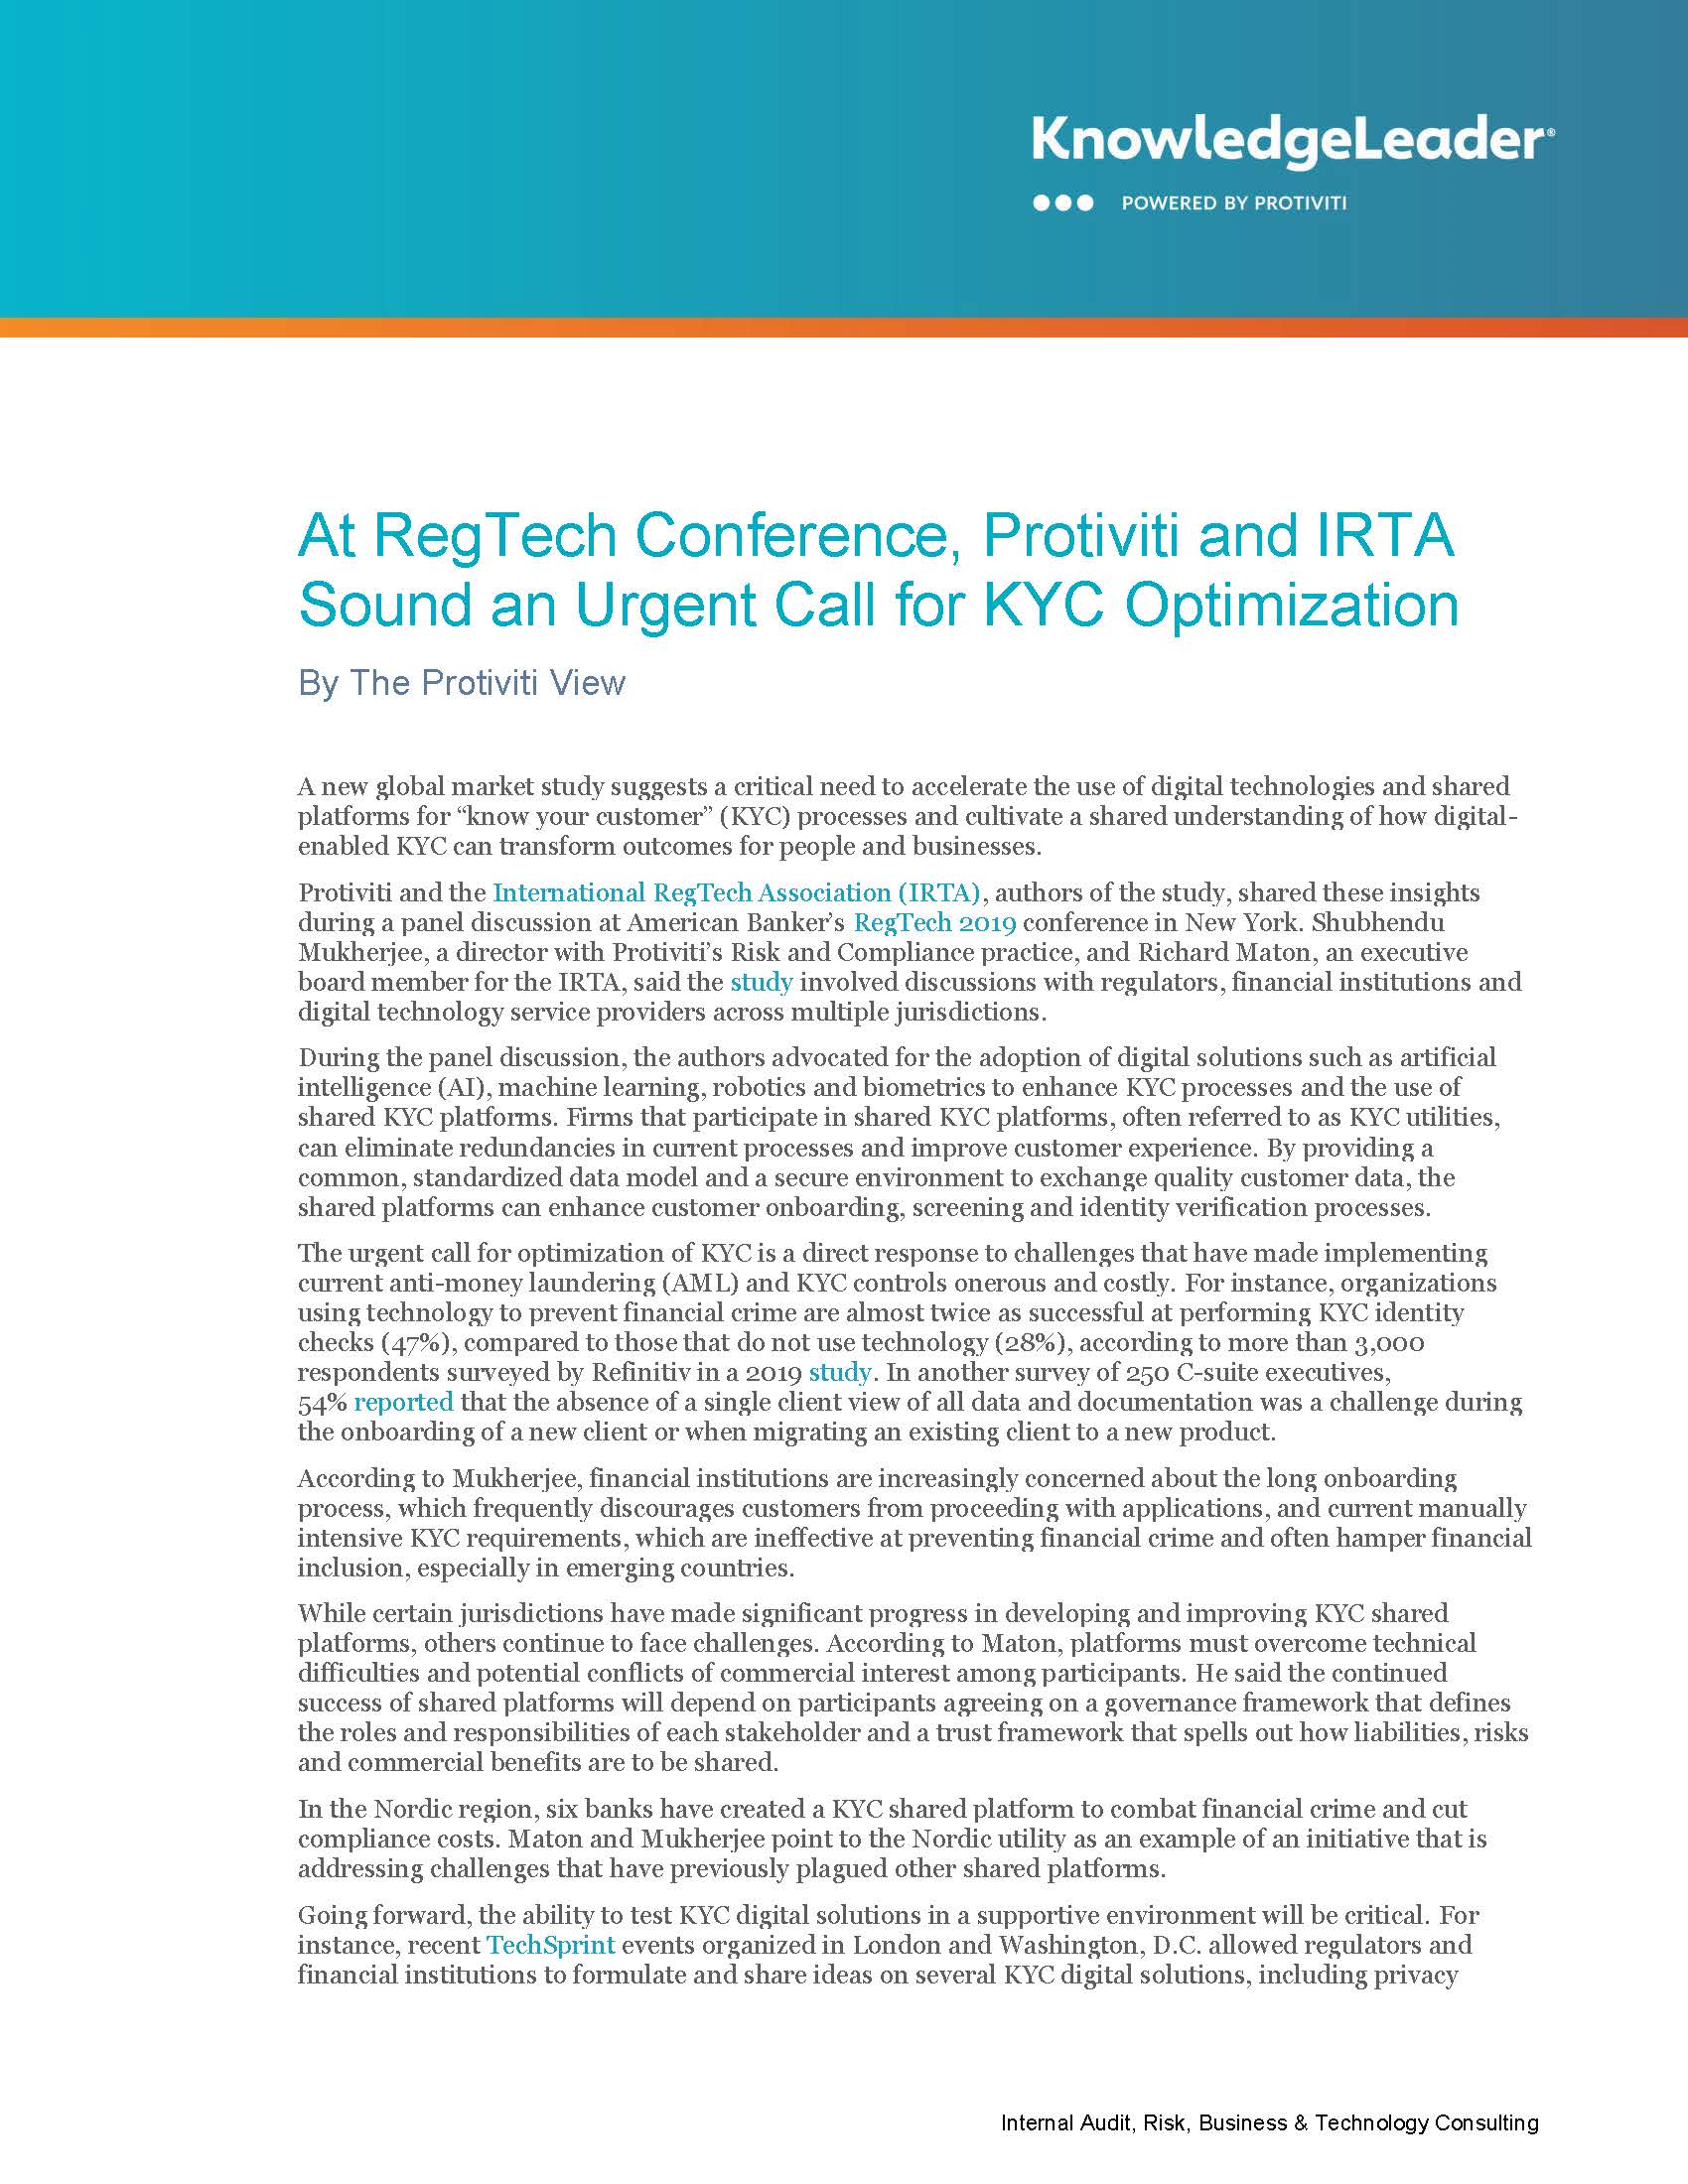 Screenshot of the first page of At RegTech Conference, Protiviti and IRTA Sound an Urgent Call for KYC Optimization